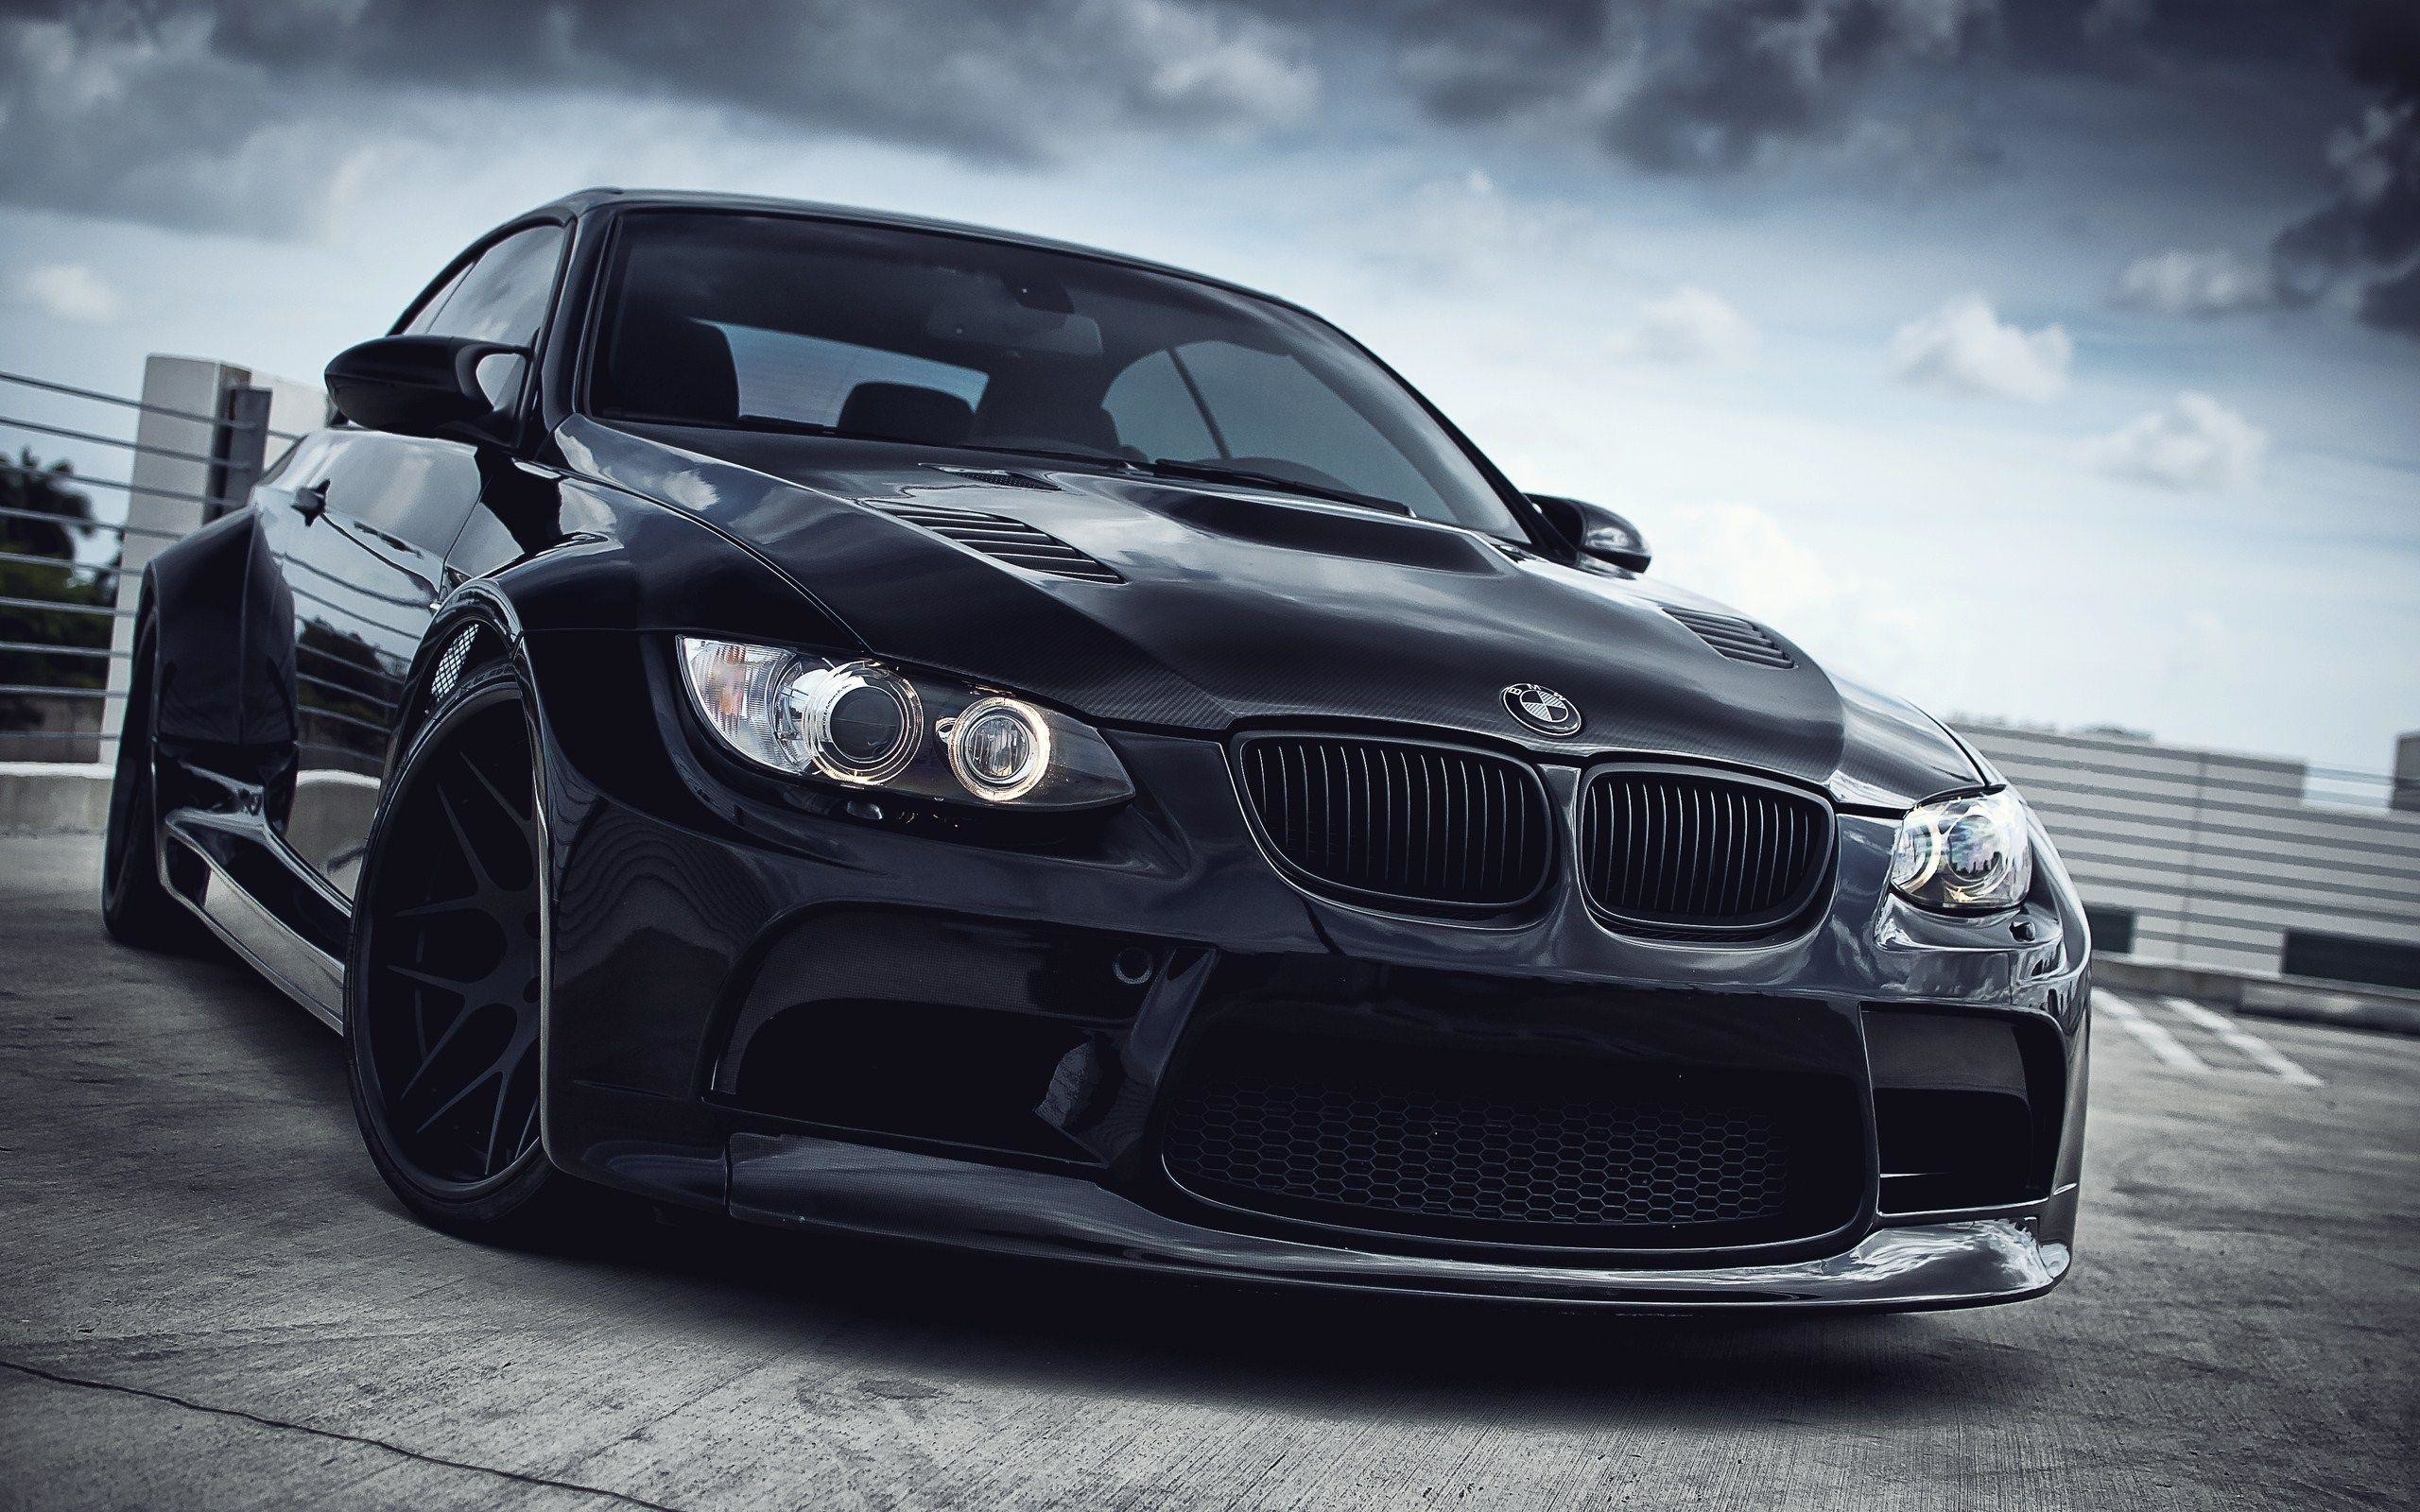 2560x1600 Cars Bmw M3 Wallpapers For Computer 18923 Full HD Wallpaper .